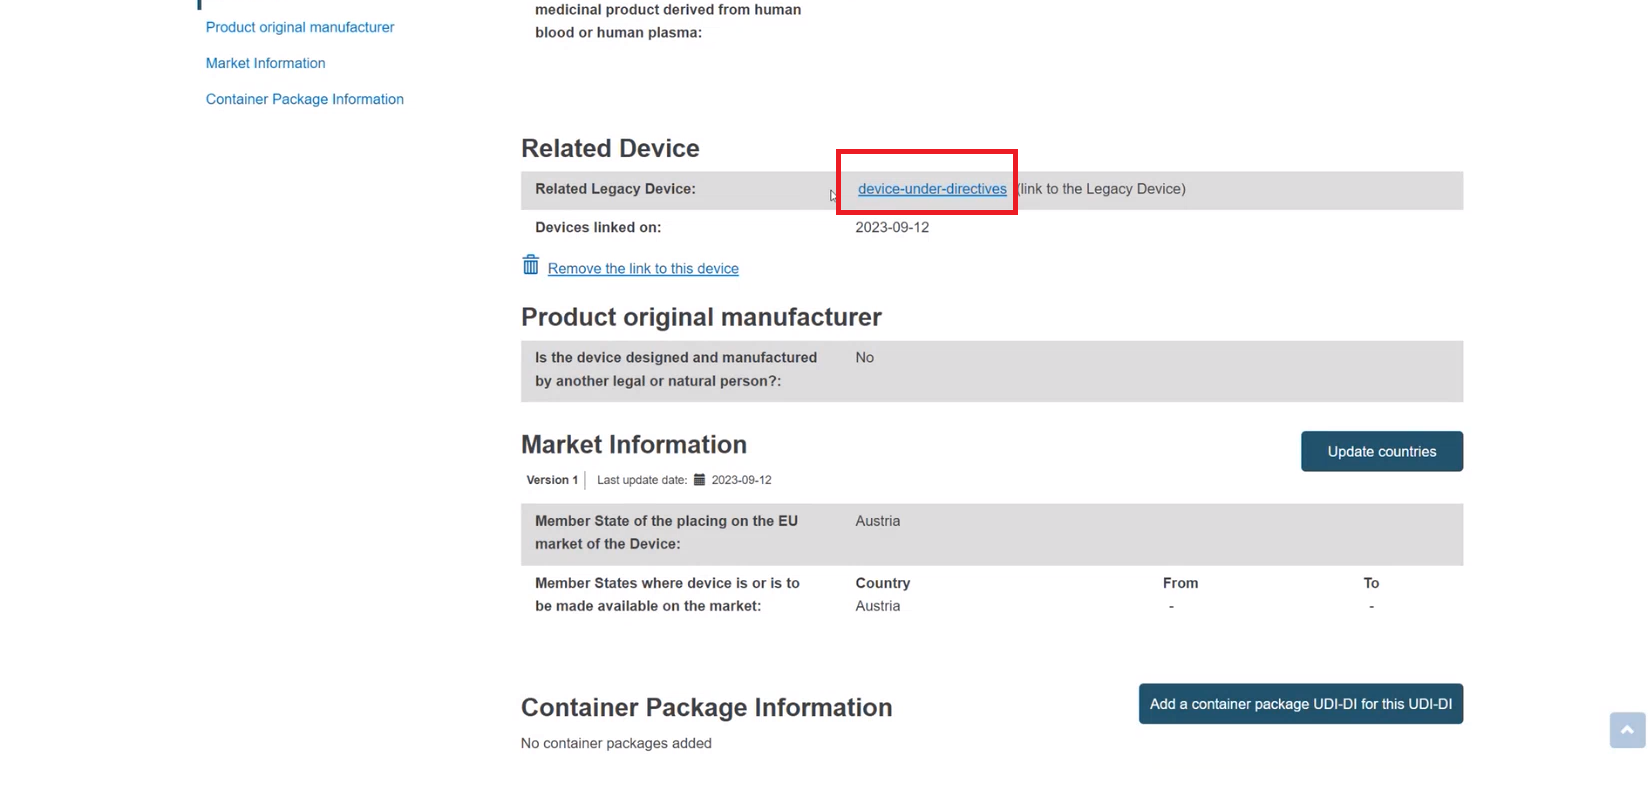 EUDAMED link to the legacy device under the related device section